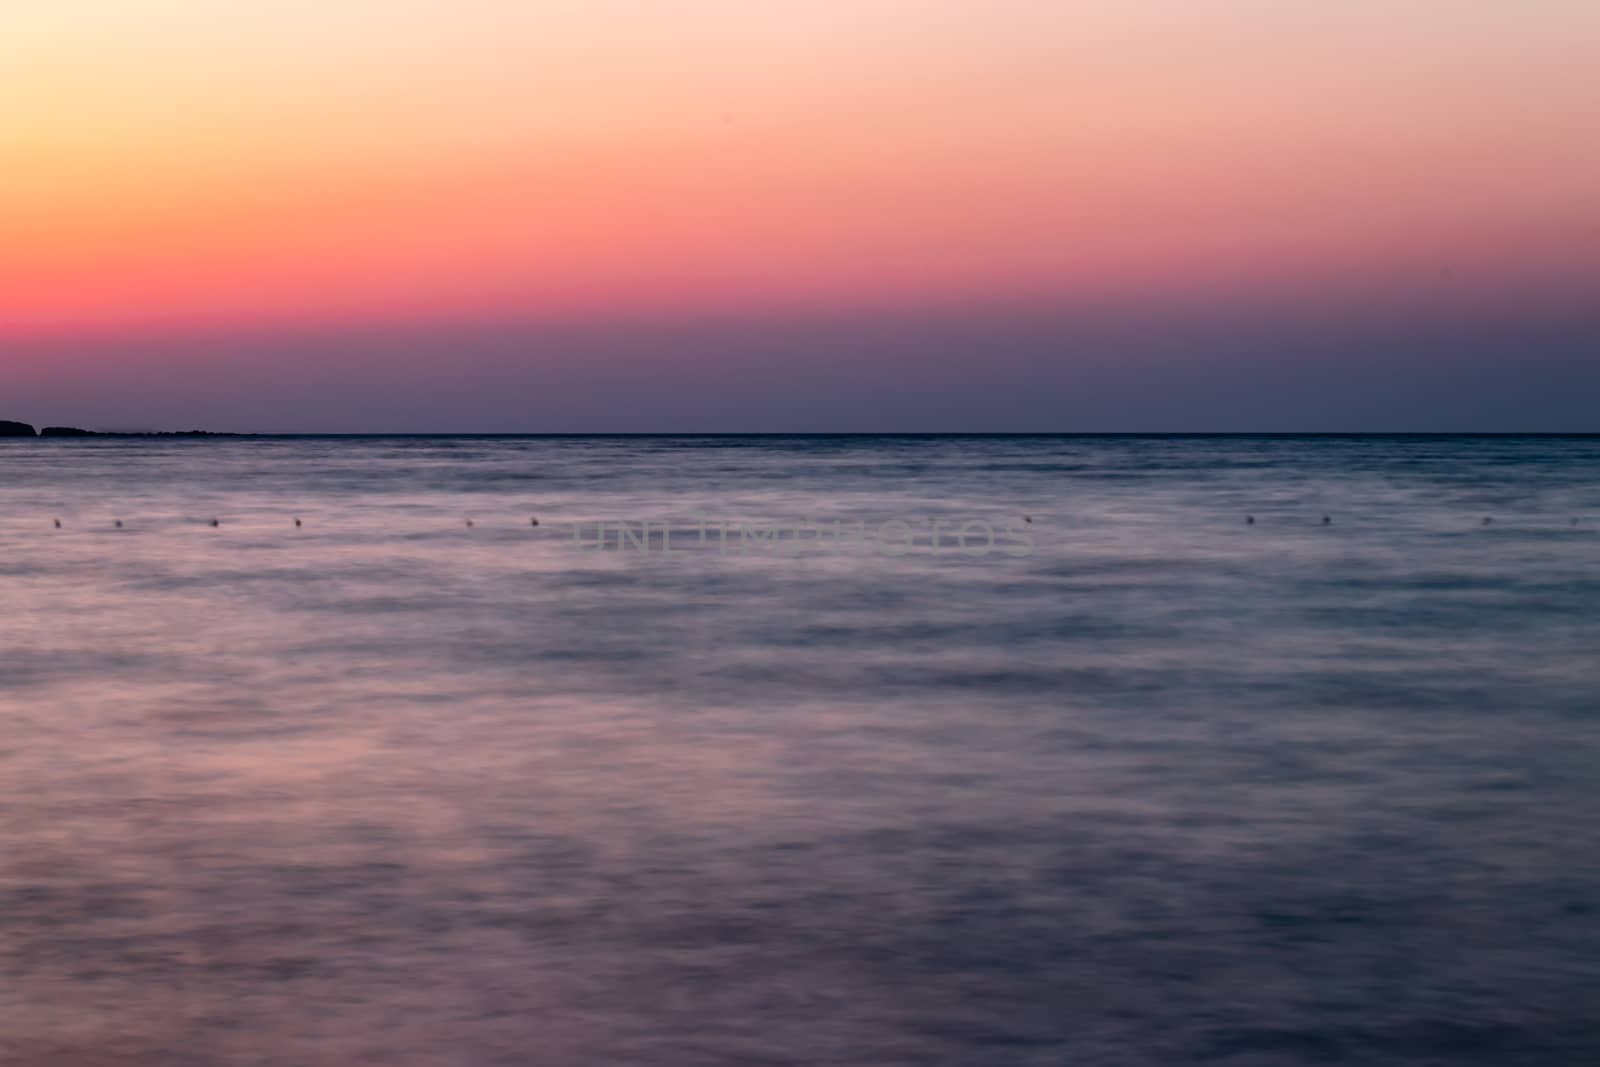 a long exposure wide landscape shoot of sea at sunset with good colors very smooth shoot. photo has taken at izmir/turkey.